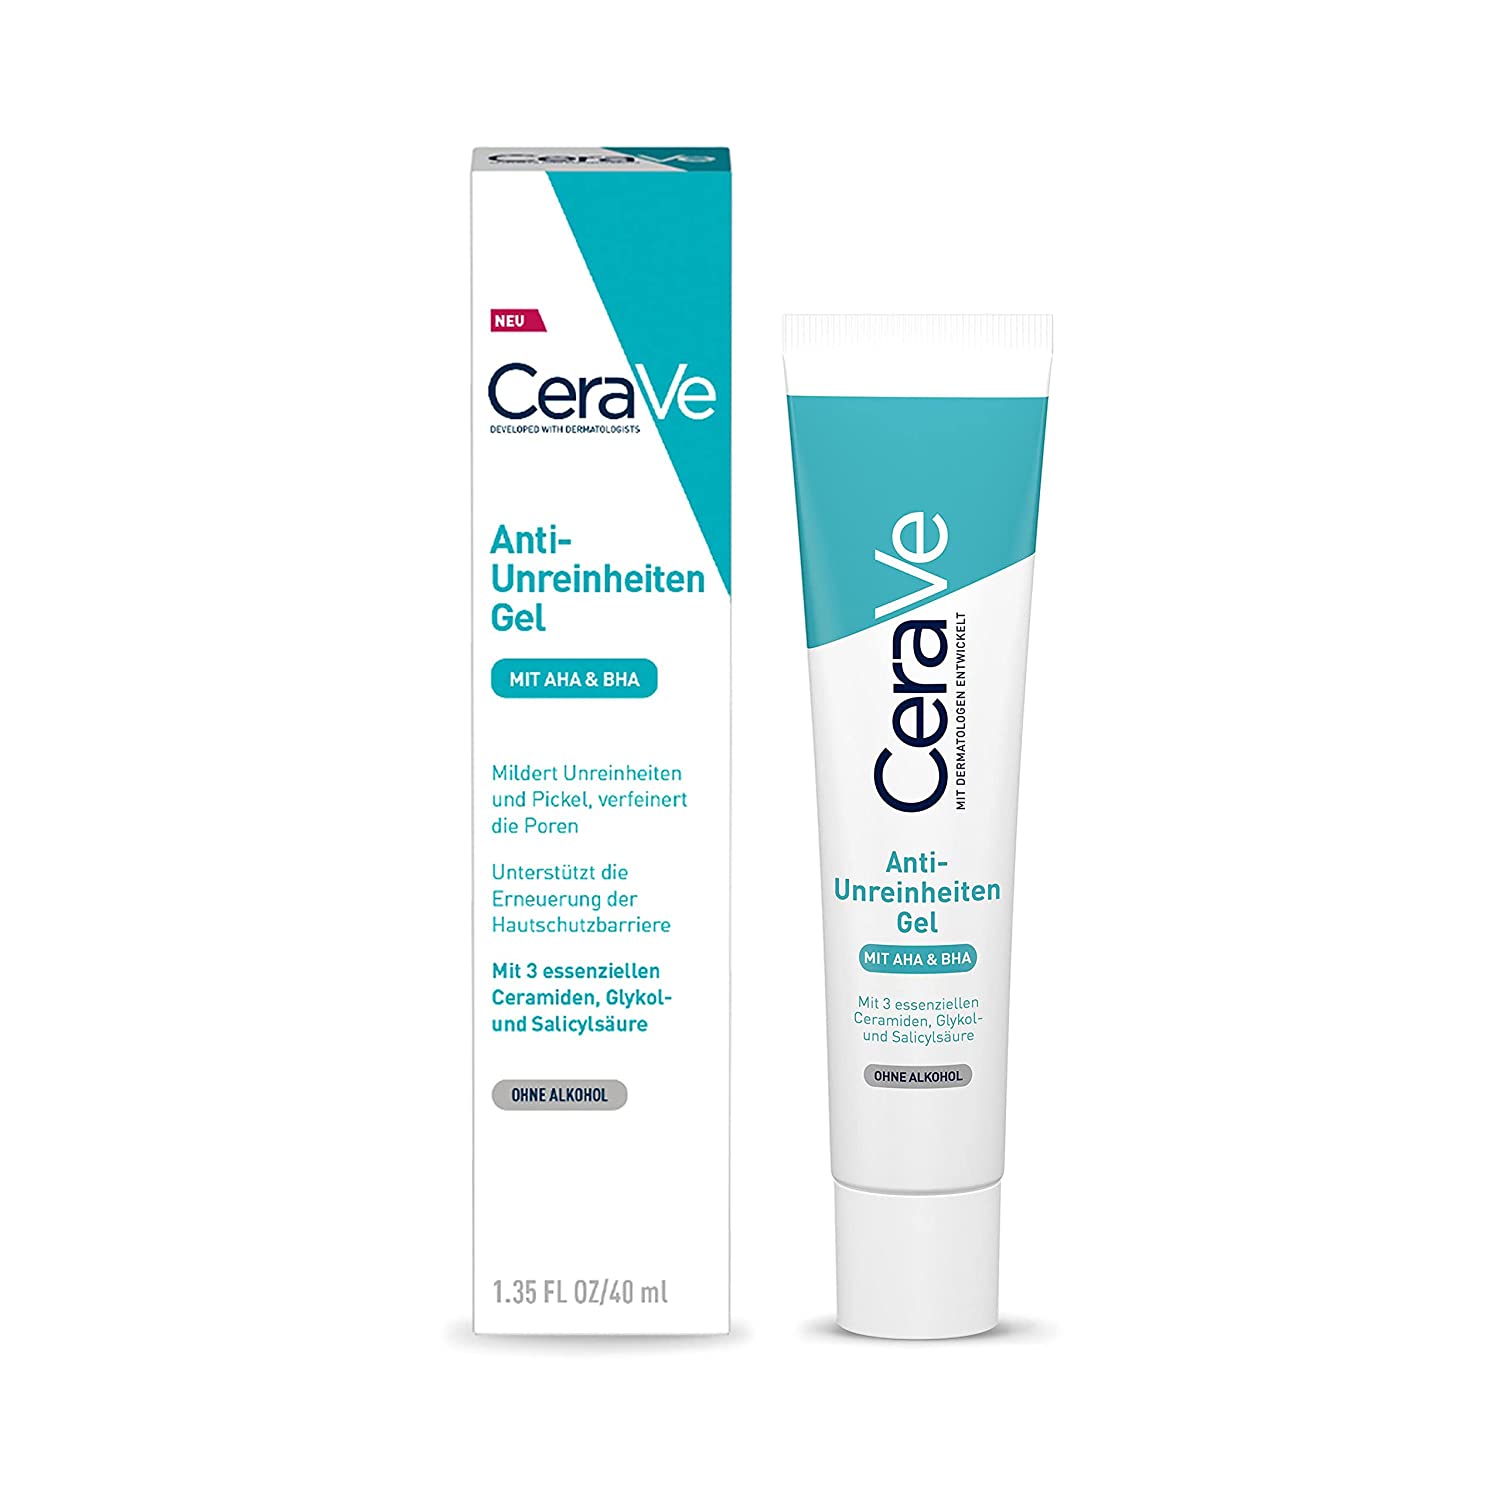 CeraVe Anti-impurities gel for the face, face care against impurities and pimples, for oily and acne-prone skin, with clarifying salicylic acid, 1 x 40 ml, ‎anti-impurities